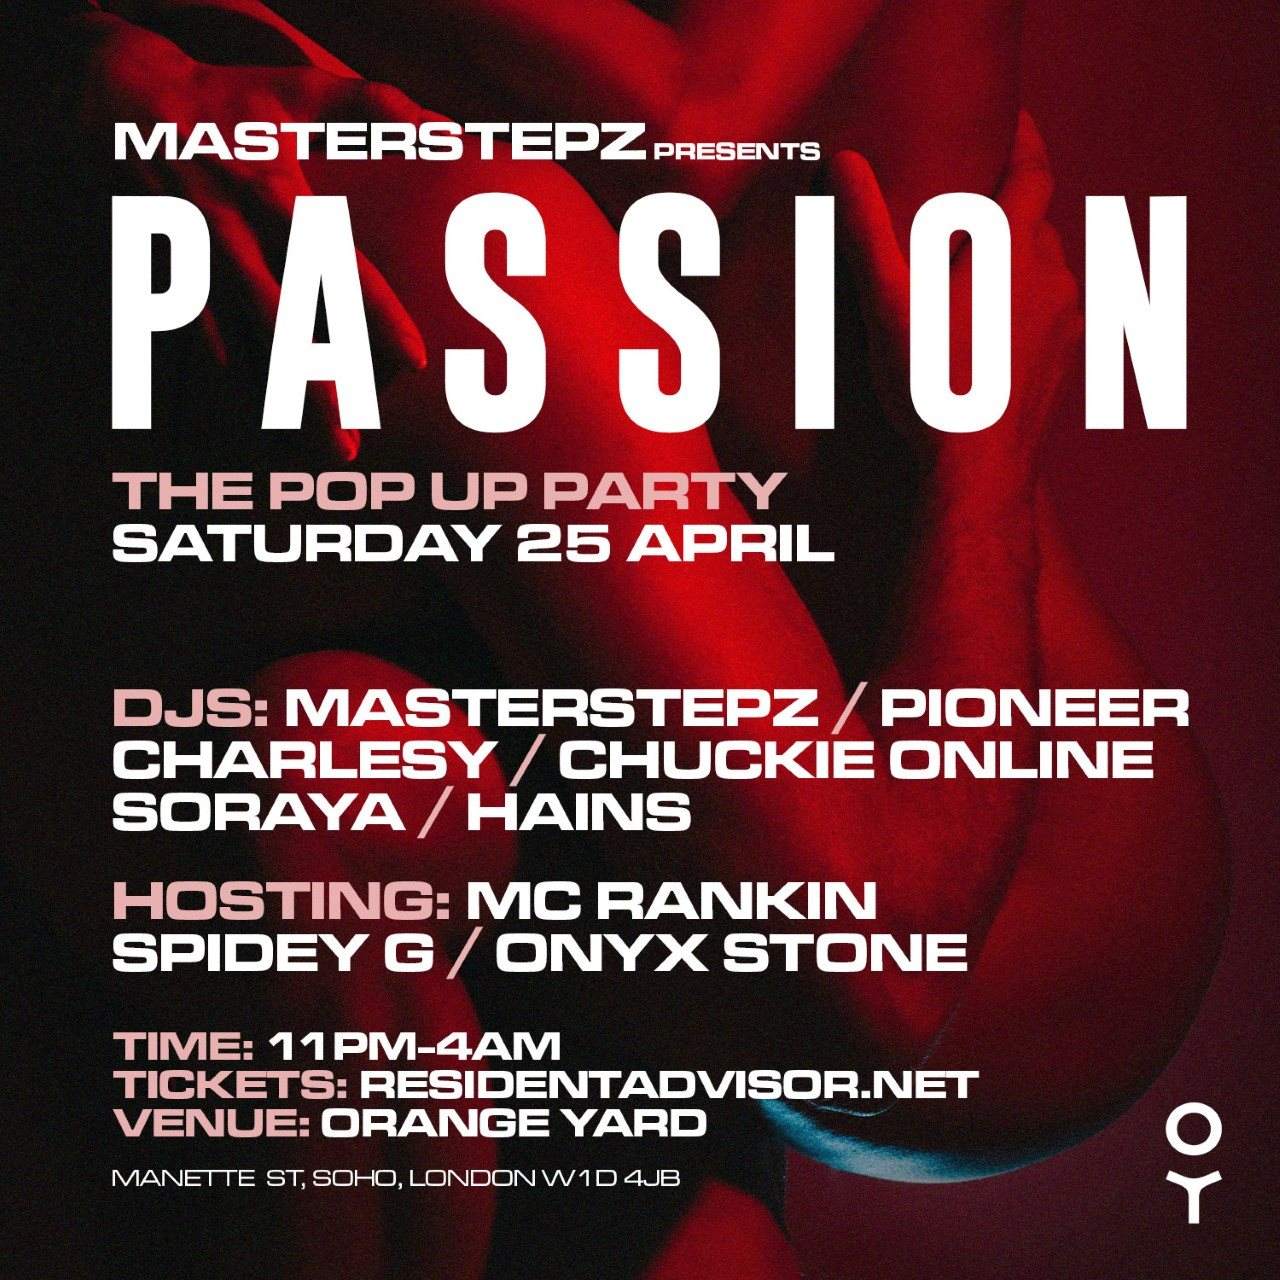 Masterstepz presents 'Passion - The Pop Up Party' - フライヤー表